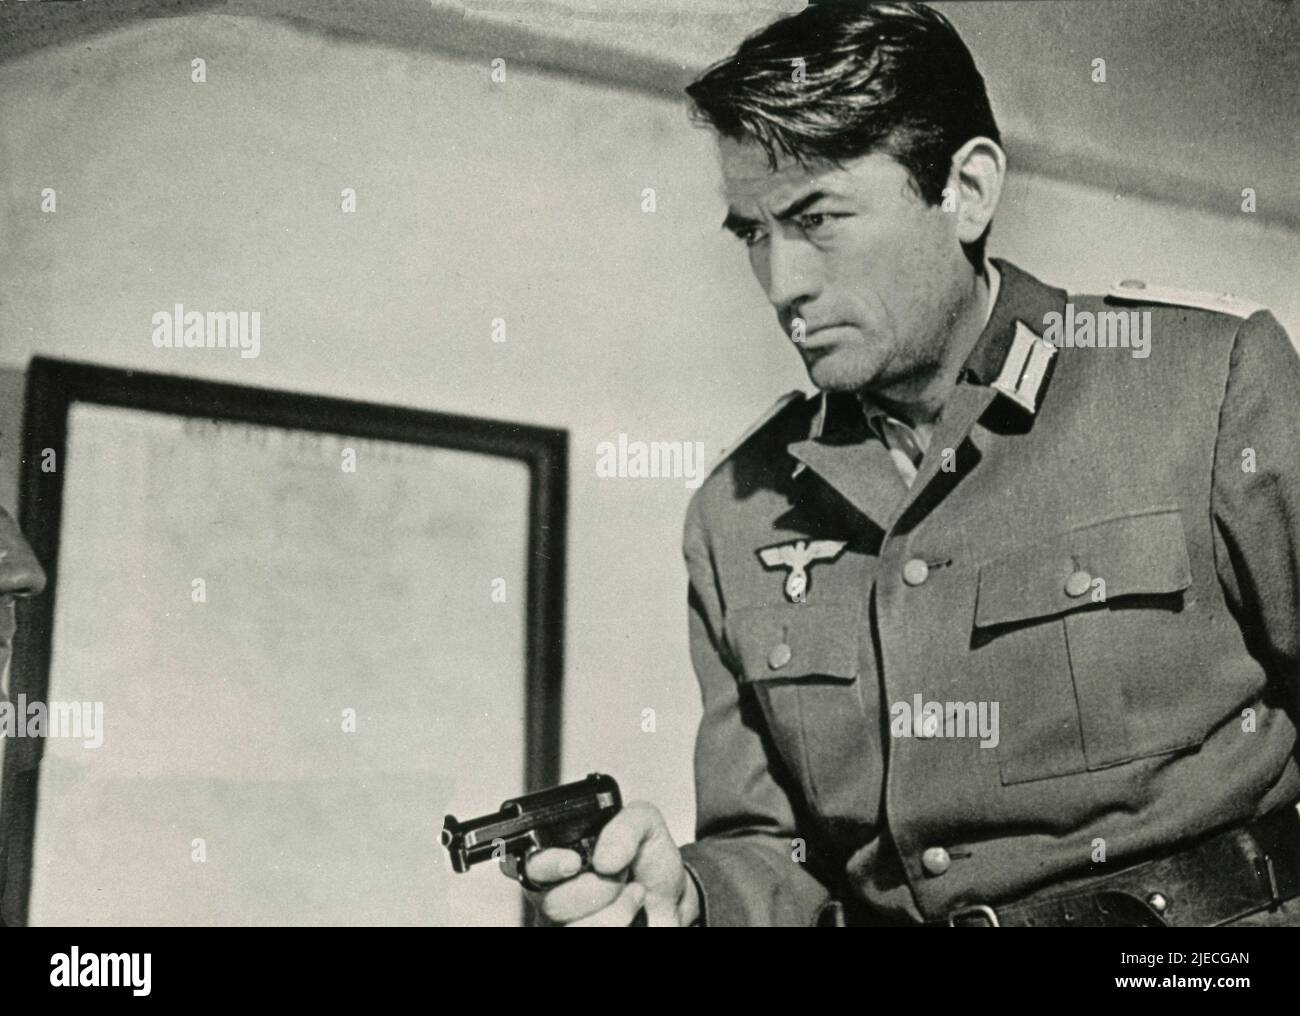 American actor Gregory Peck in the movie The Guns of Navarone, USA 1961 Stock Photo